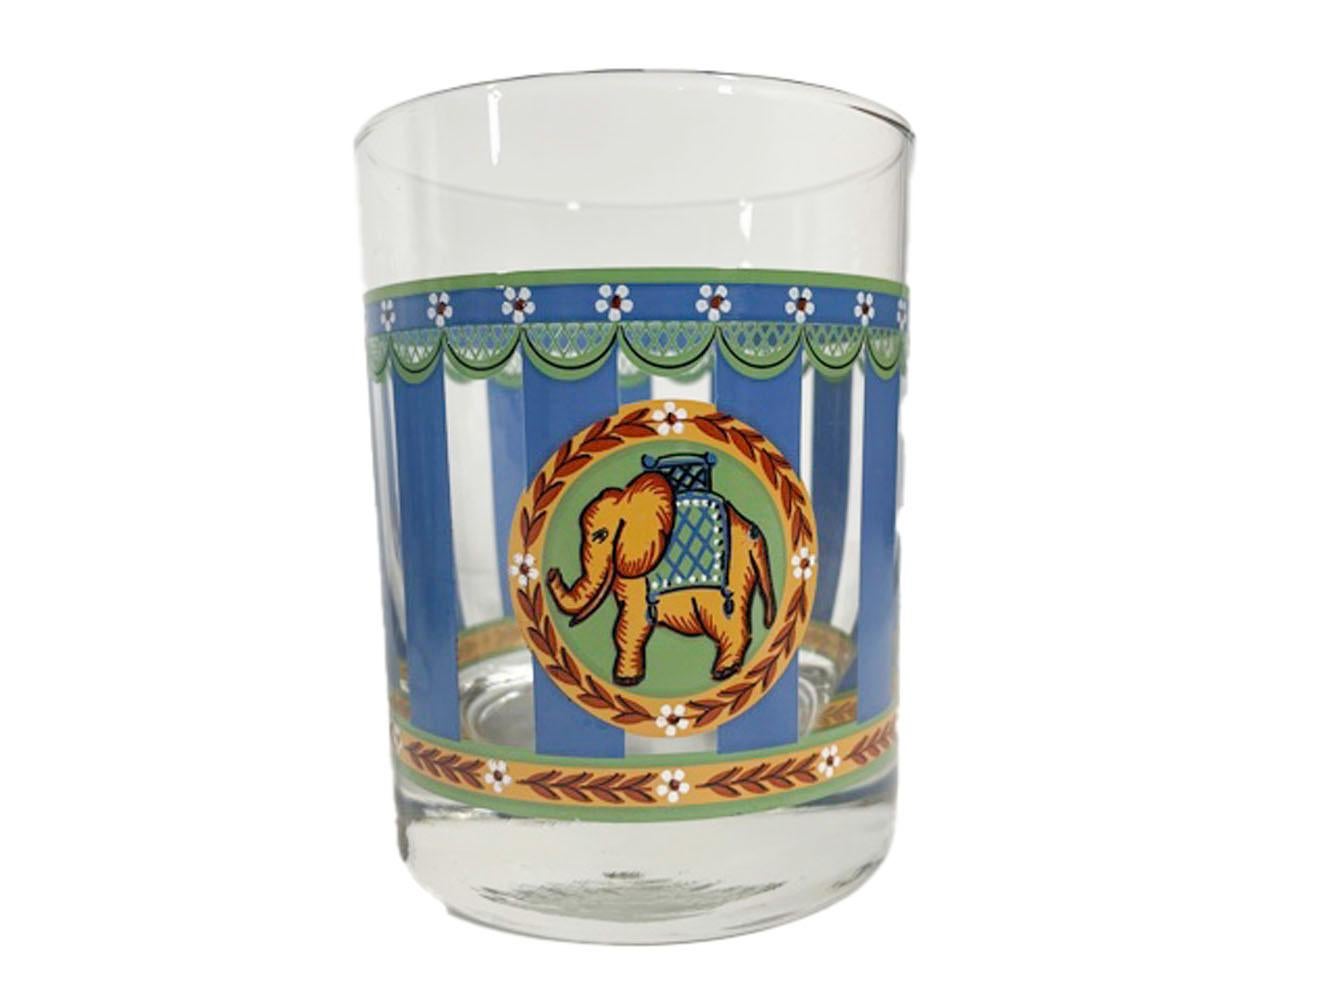 Vintage rocks glasses decorated with vertical blue bars with green tan and white decorative bands at top and bottom and having a medallion to one side with a caparisoned elephant within a wreath of leaves and flowers.